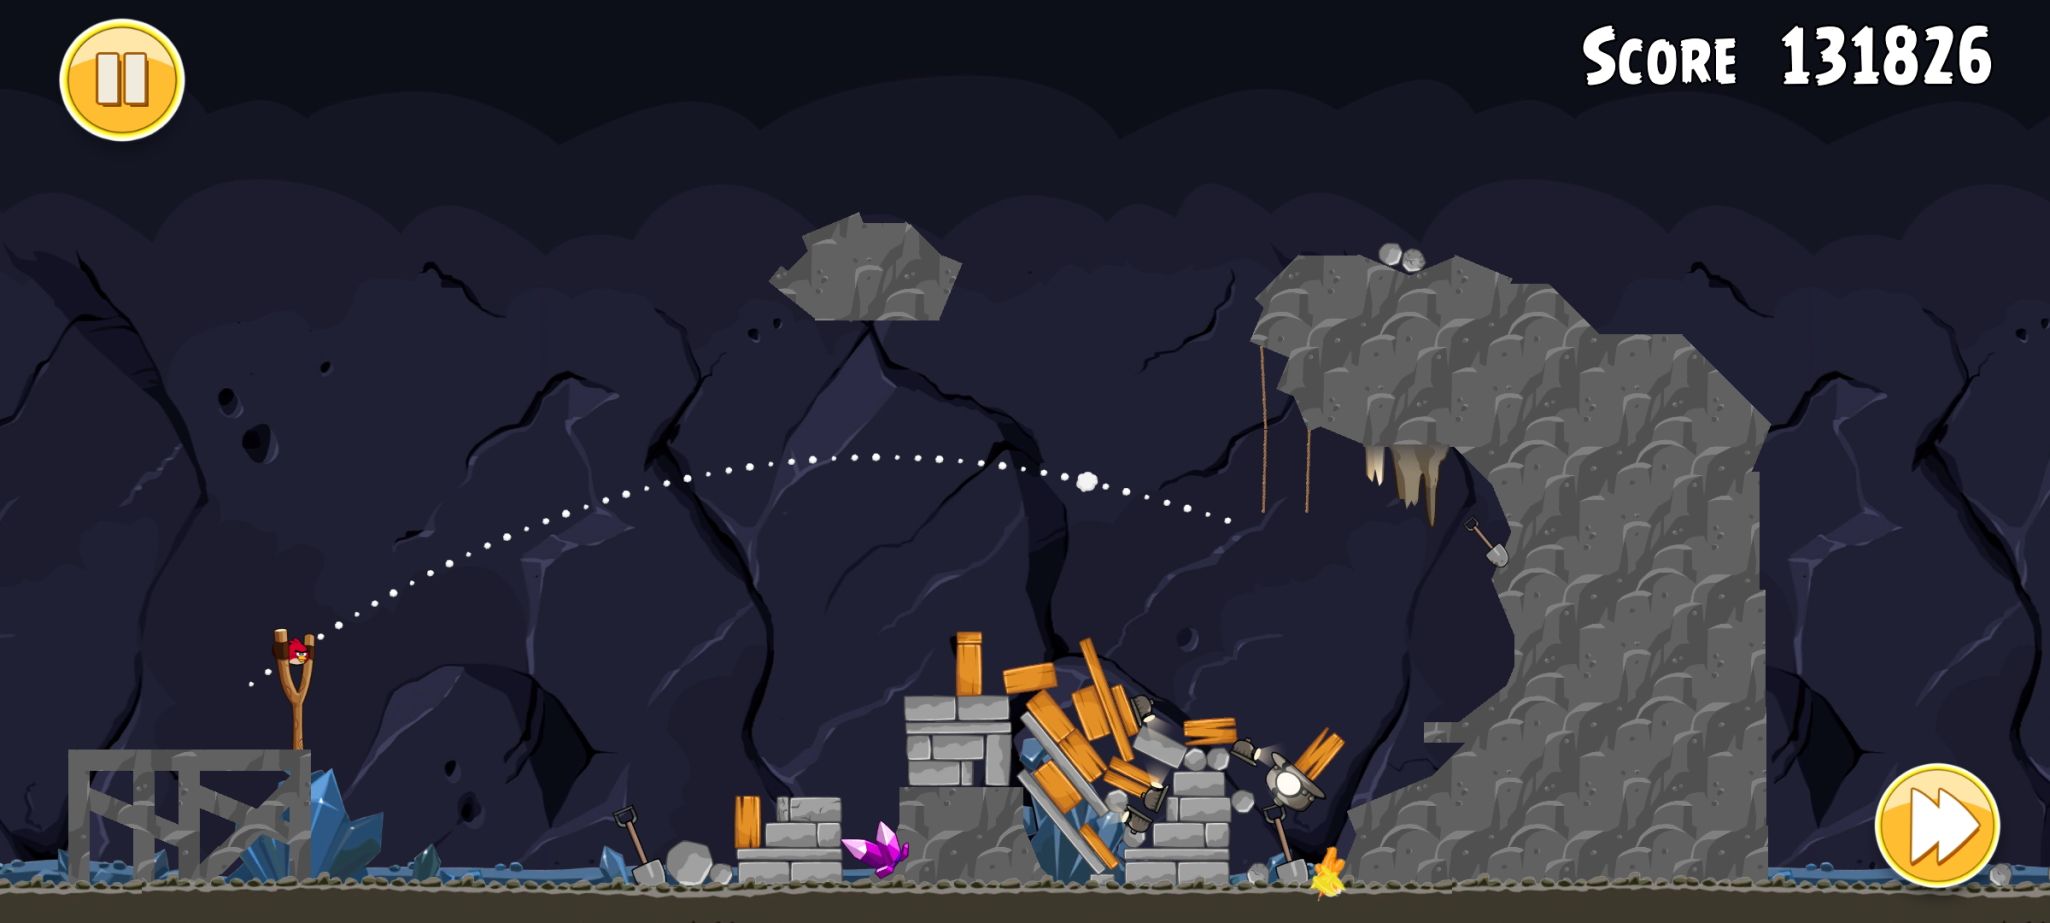 Previous slingshot path showcased in Angry Birds classic screenshot